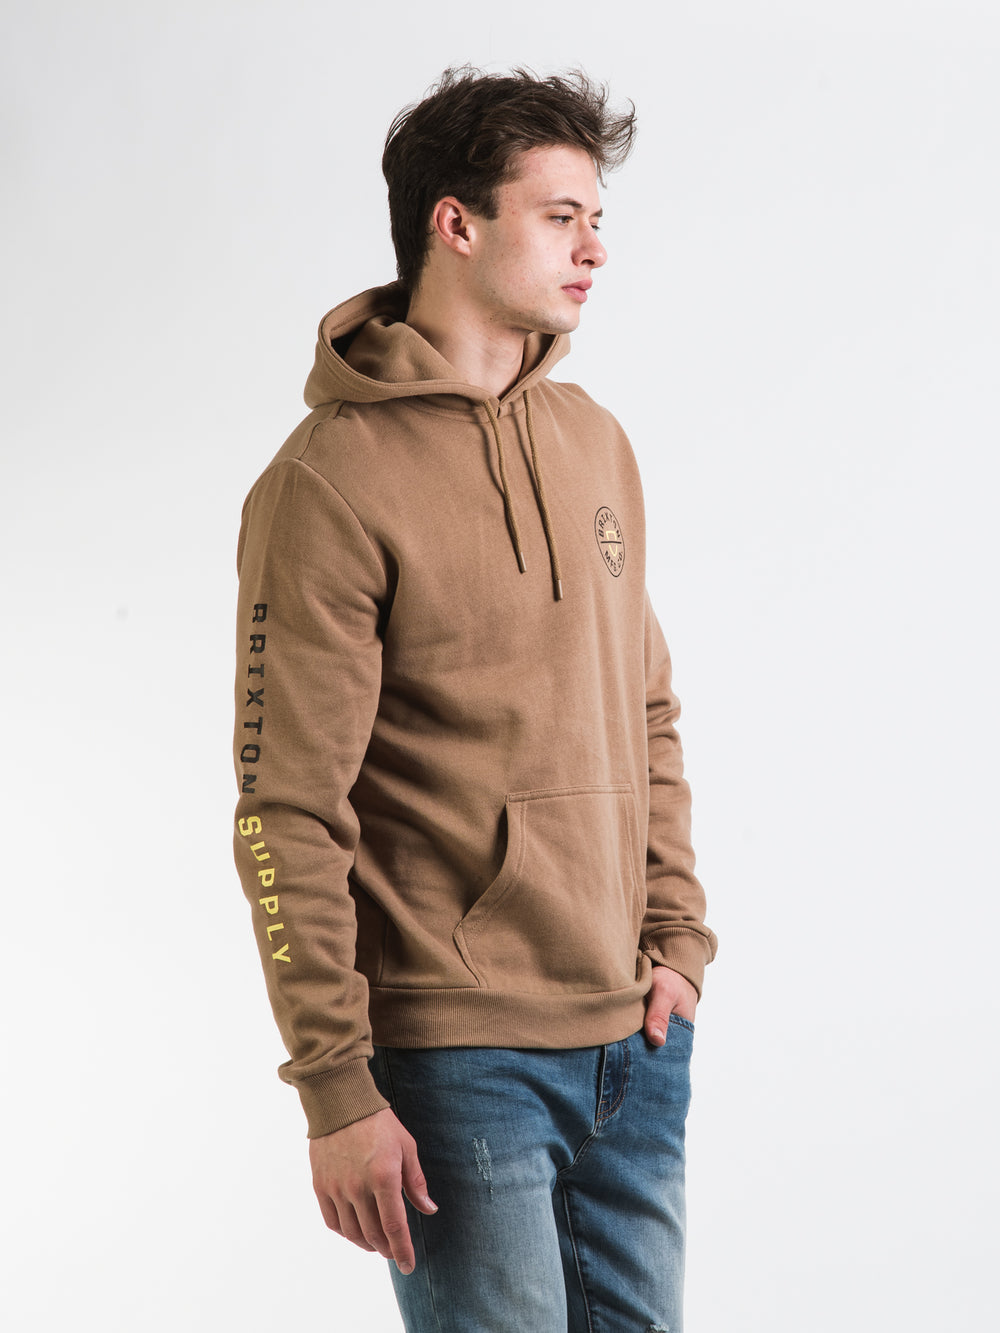 BRIXTON CREST PULL OVER HOODIE MOJAVE LIMELIGHT - DÉSTOCKAGE